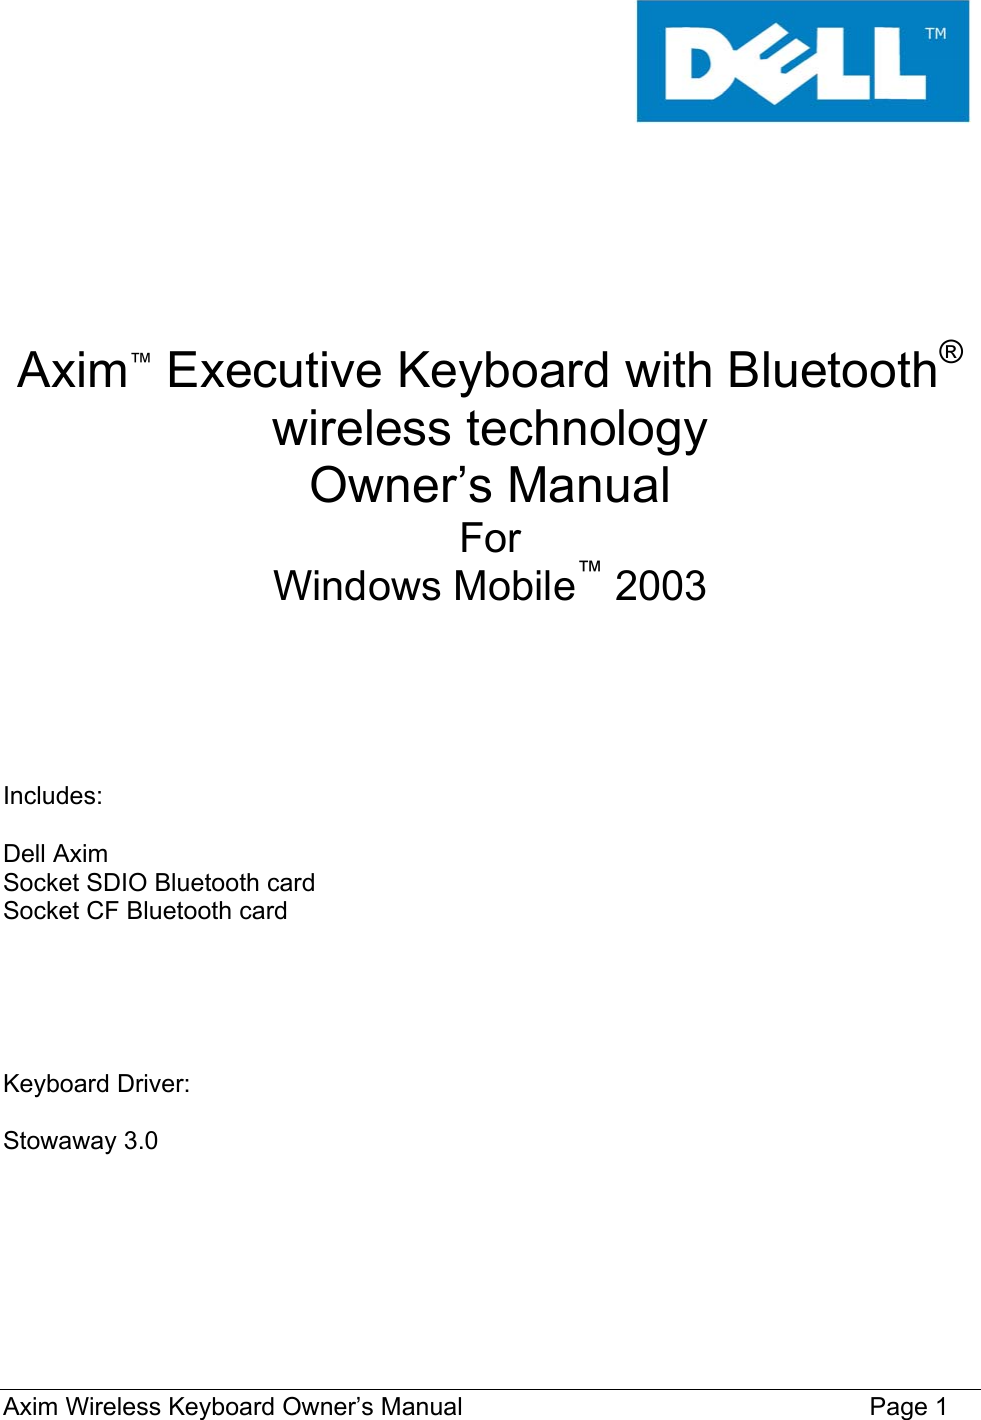       Axim™ Executive Keyboard with Bluetooth® wireless technology Owner’s Manual For Windows Mobile™ 2003       Includes:   Dell Axim Socket SDIO Bluetooth card Socket CF Bluetooth card      Keyboard Driver:  Stowaway 3.0     Axim Wireless Keyboard Owner’s Manual                                                                 Page 1 